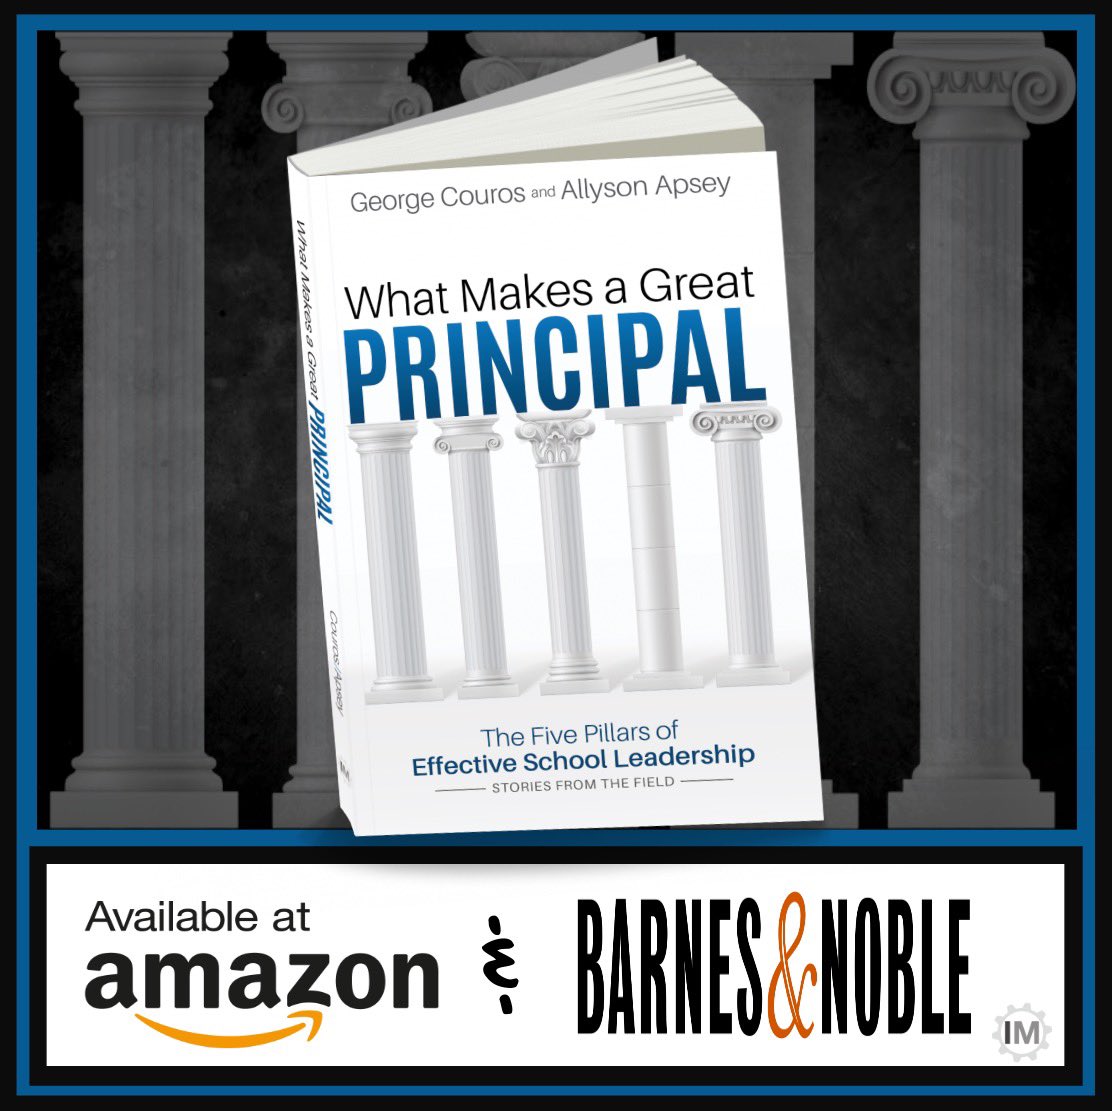 ⭐️⭐️⭐️⭐️⭐️ Special Release!!! Incredible new leadership book from @gcouros & @AllysonApsey!! Brand new from IMpress!! ⭐️⭐️⭐️⭐️⭐️ What Makes a Great Principal: The Five Pillars of Effective School Leadership a.co/d/dPq5jXx #dbcincbooks #tlap #leadlap #edleaders